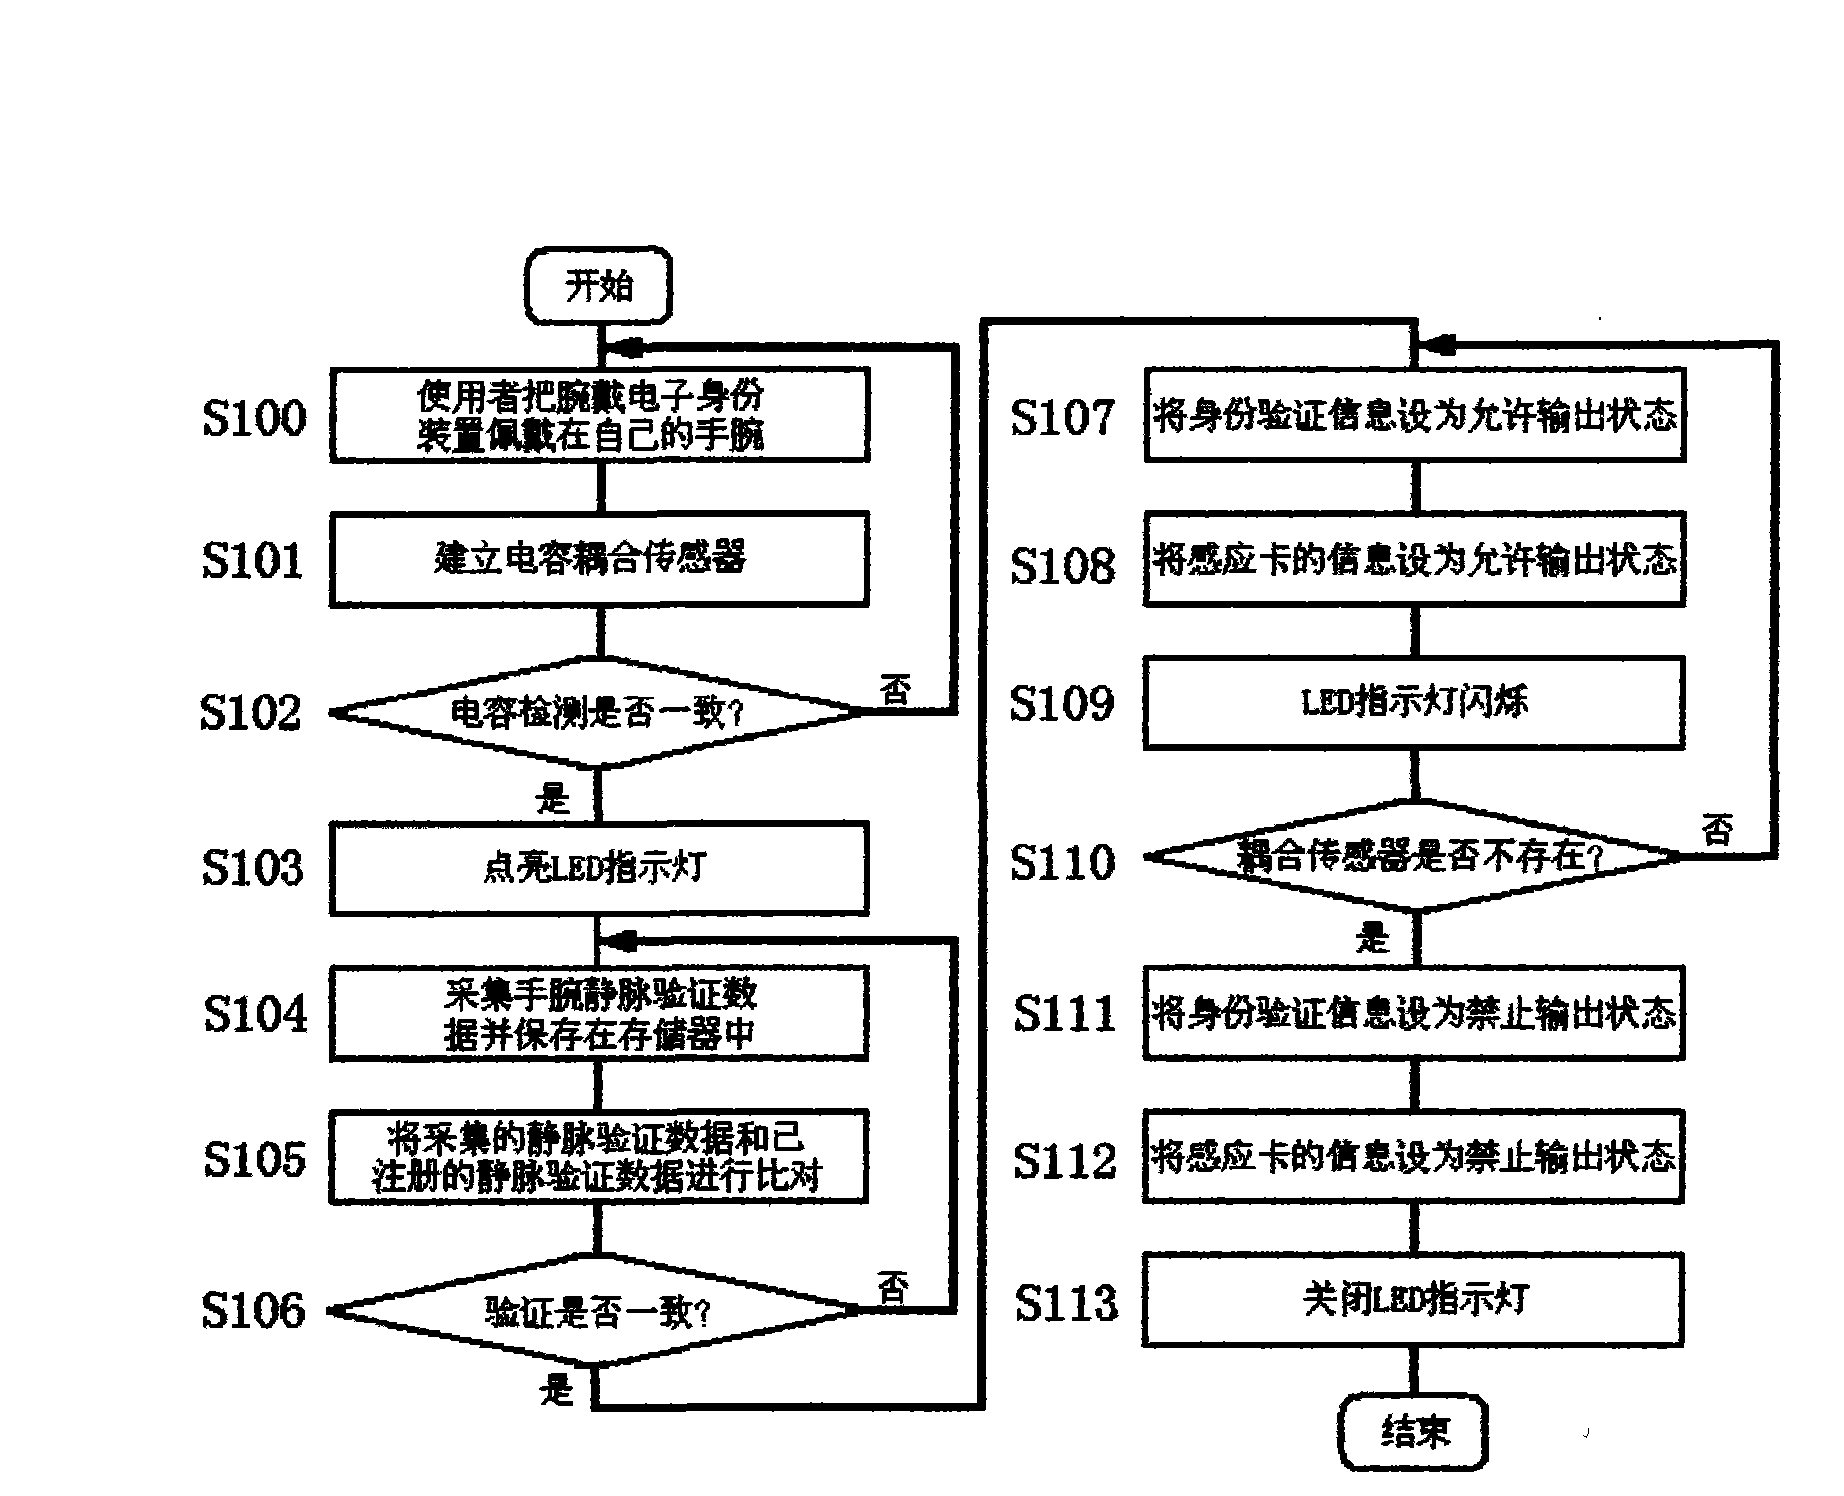 Wrist-wearing electronic identity device with vein identity verification function